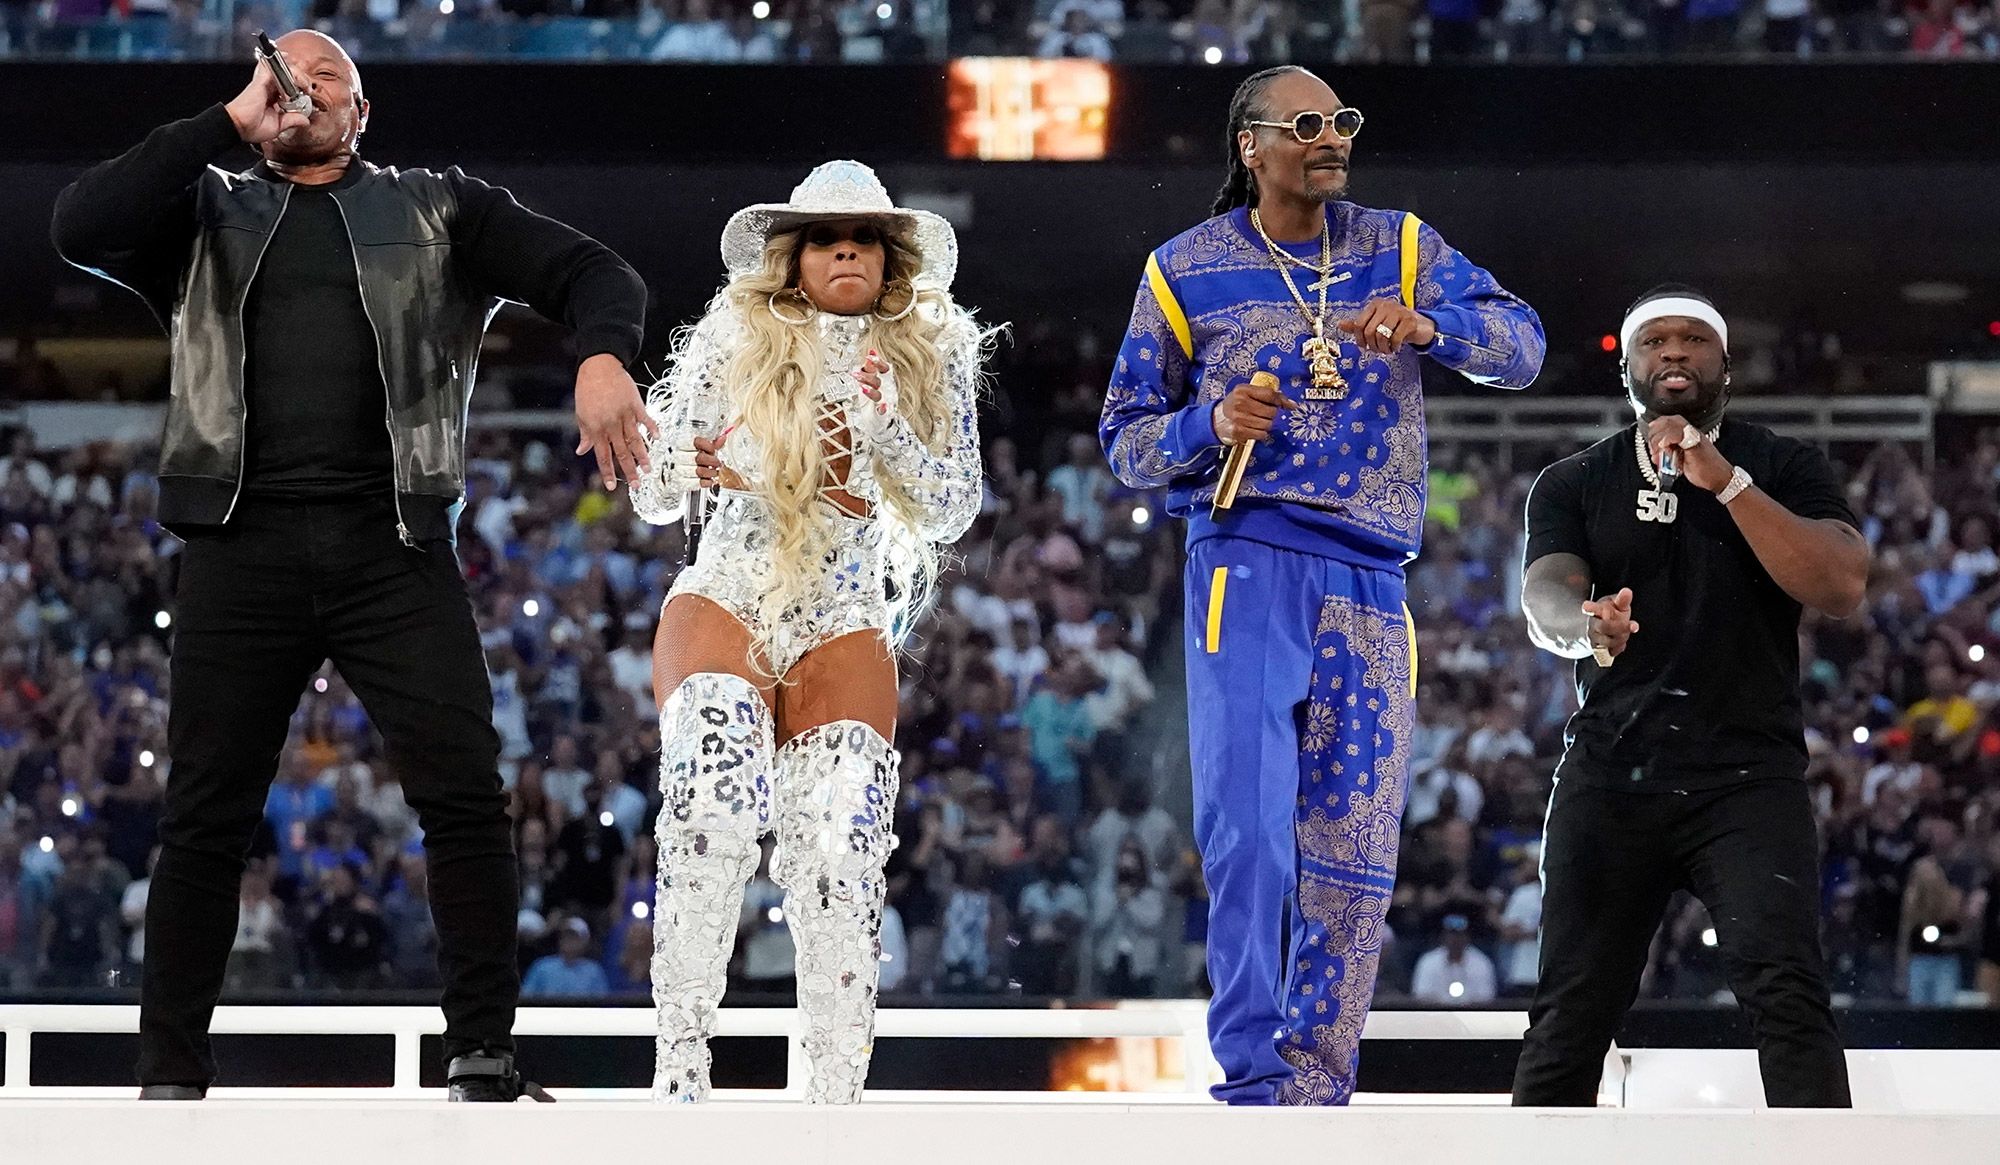 Who's playing the 2022 Super Bowl Halftime Show?